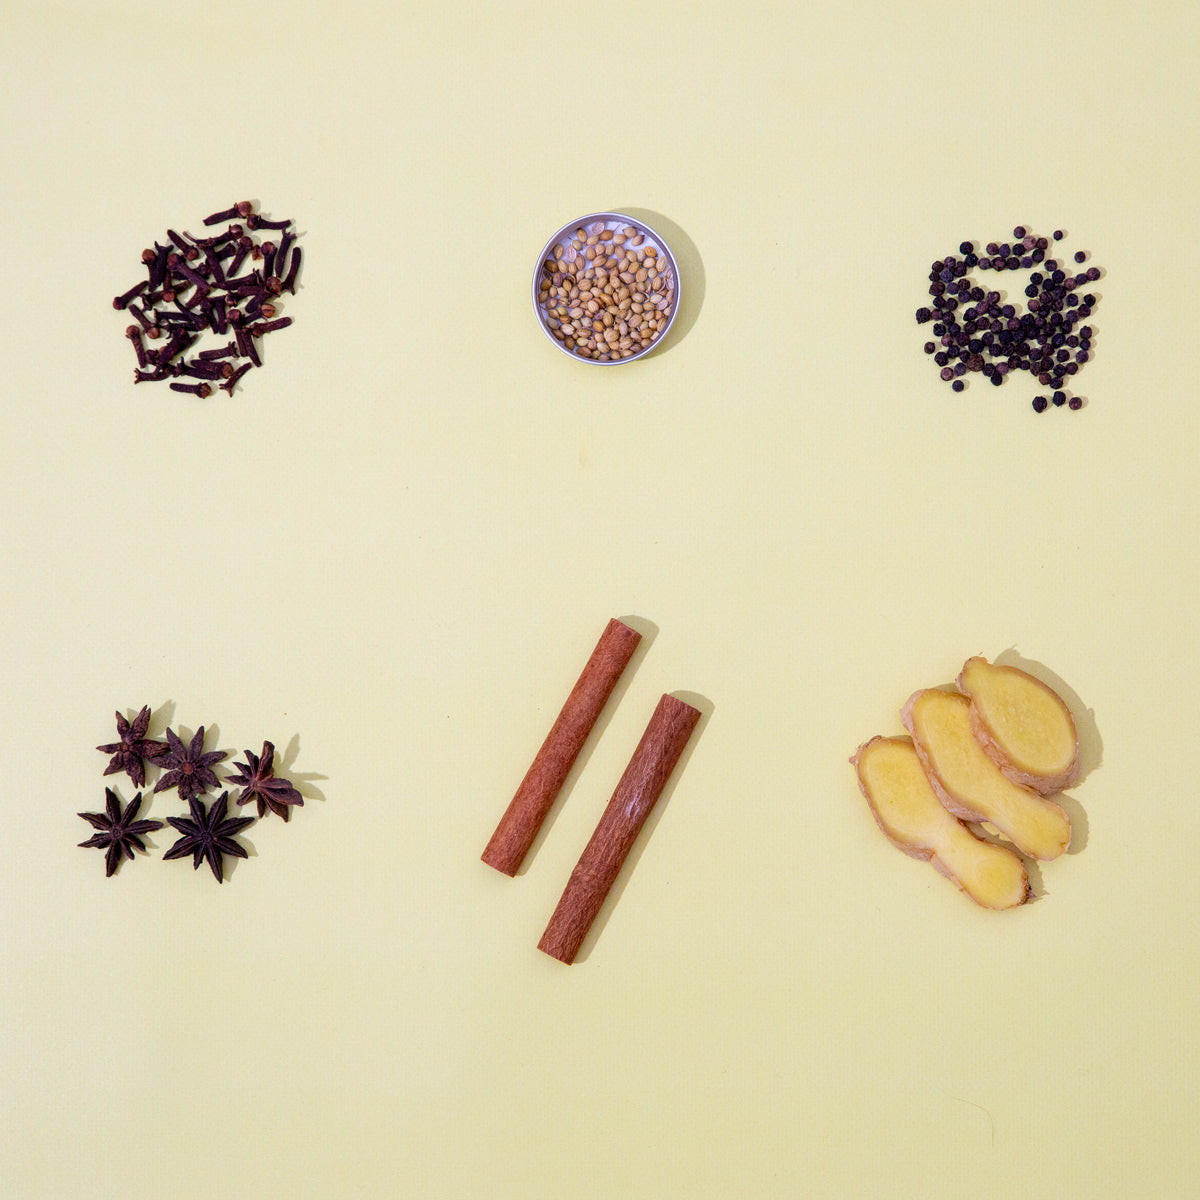 six different spices against a yellow background